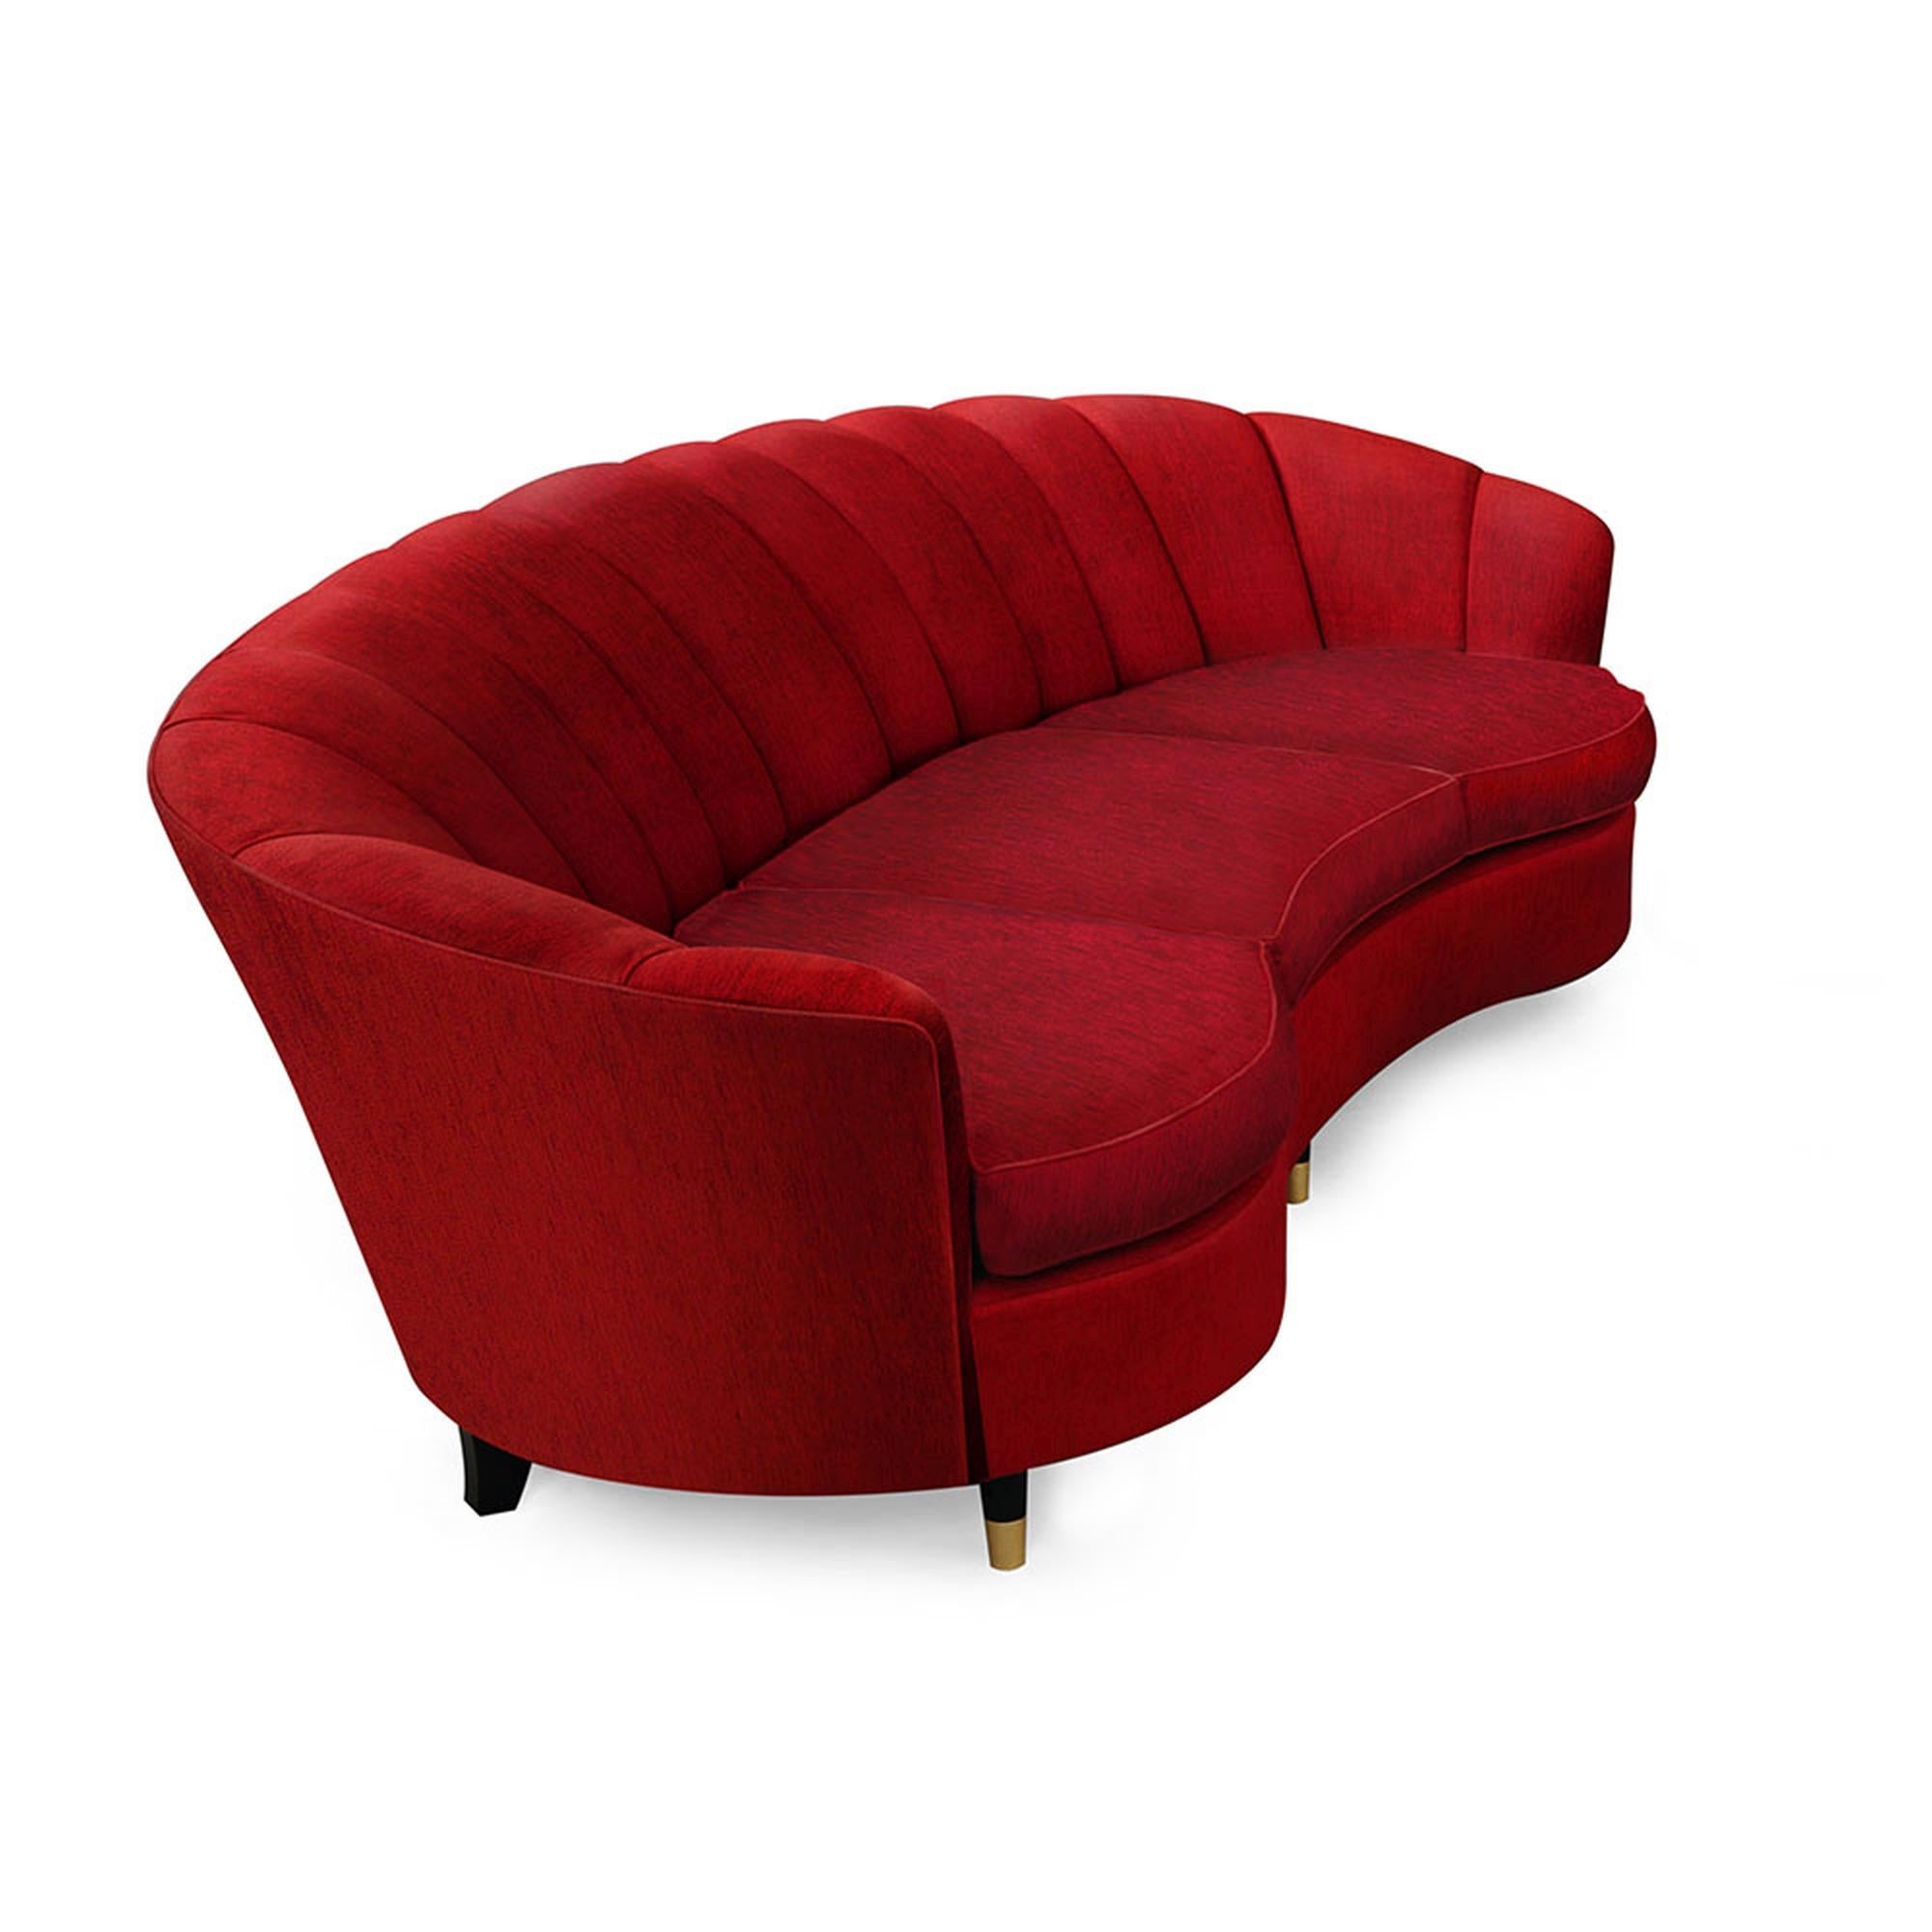 The Marmont Sofa is a majestic piece, reminiscent of a rare gem from the reveled old Hollywood era. With a curved frame and dramatic ared ends, this sofa is upholstered on all sides, features wide scalloped channel tufting, and offers an